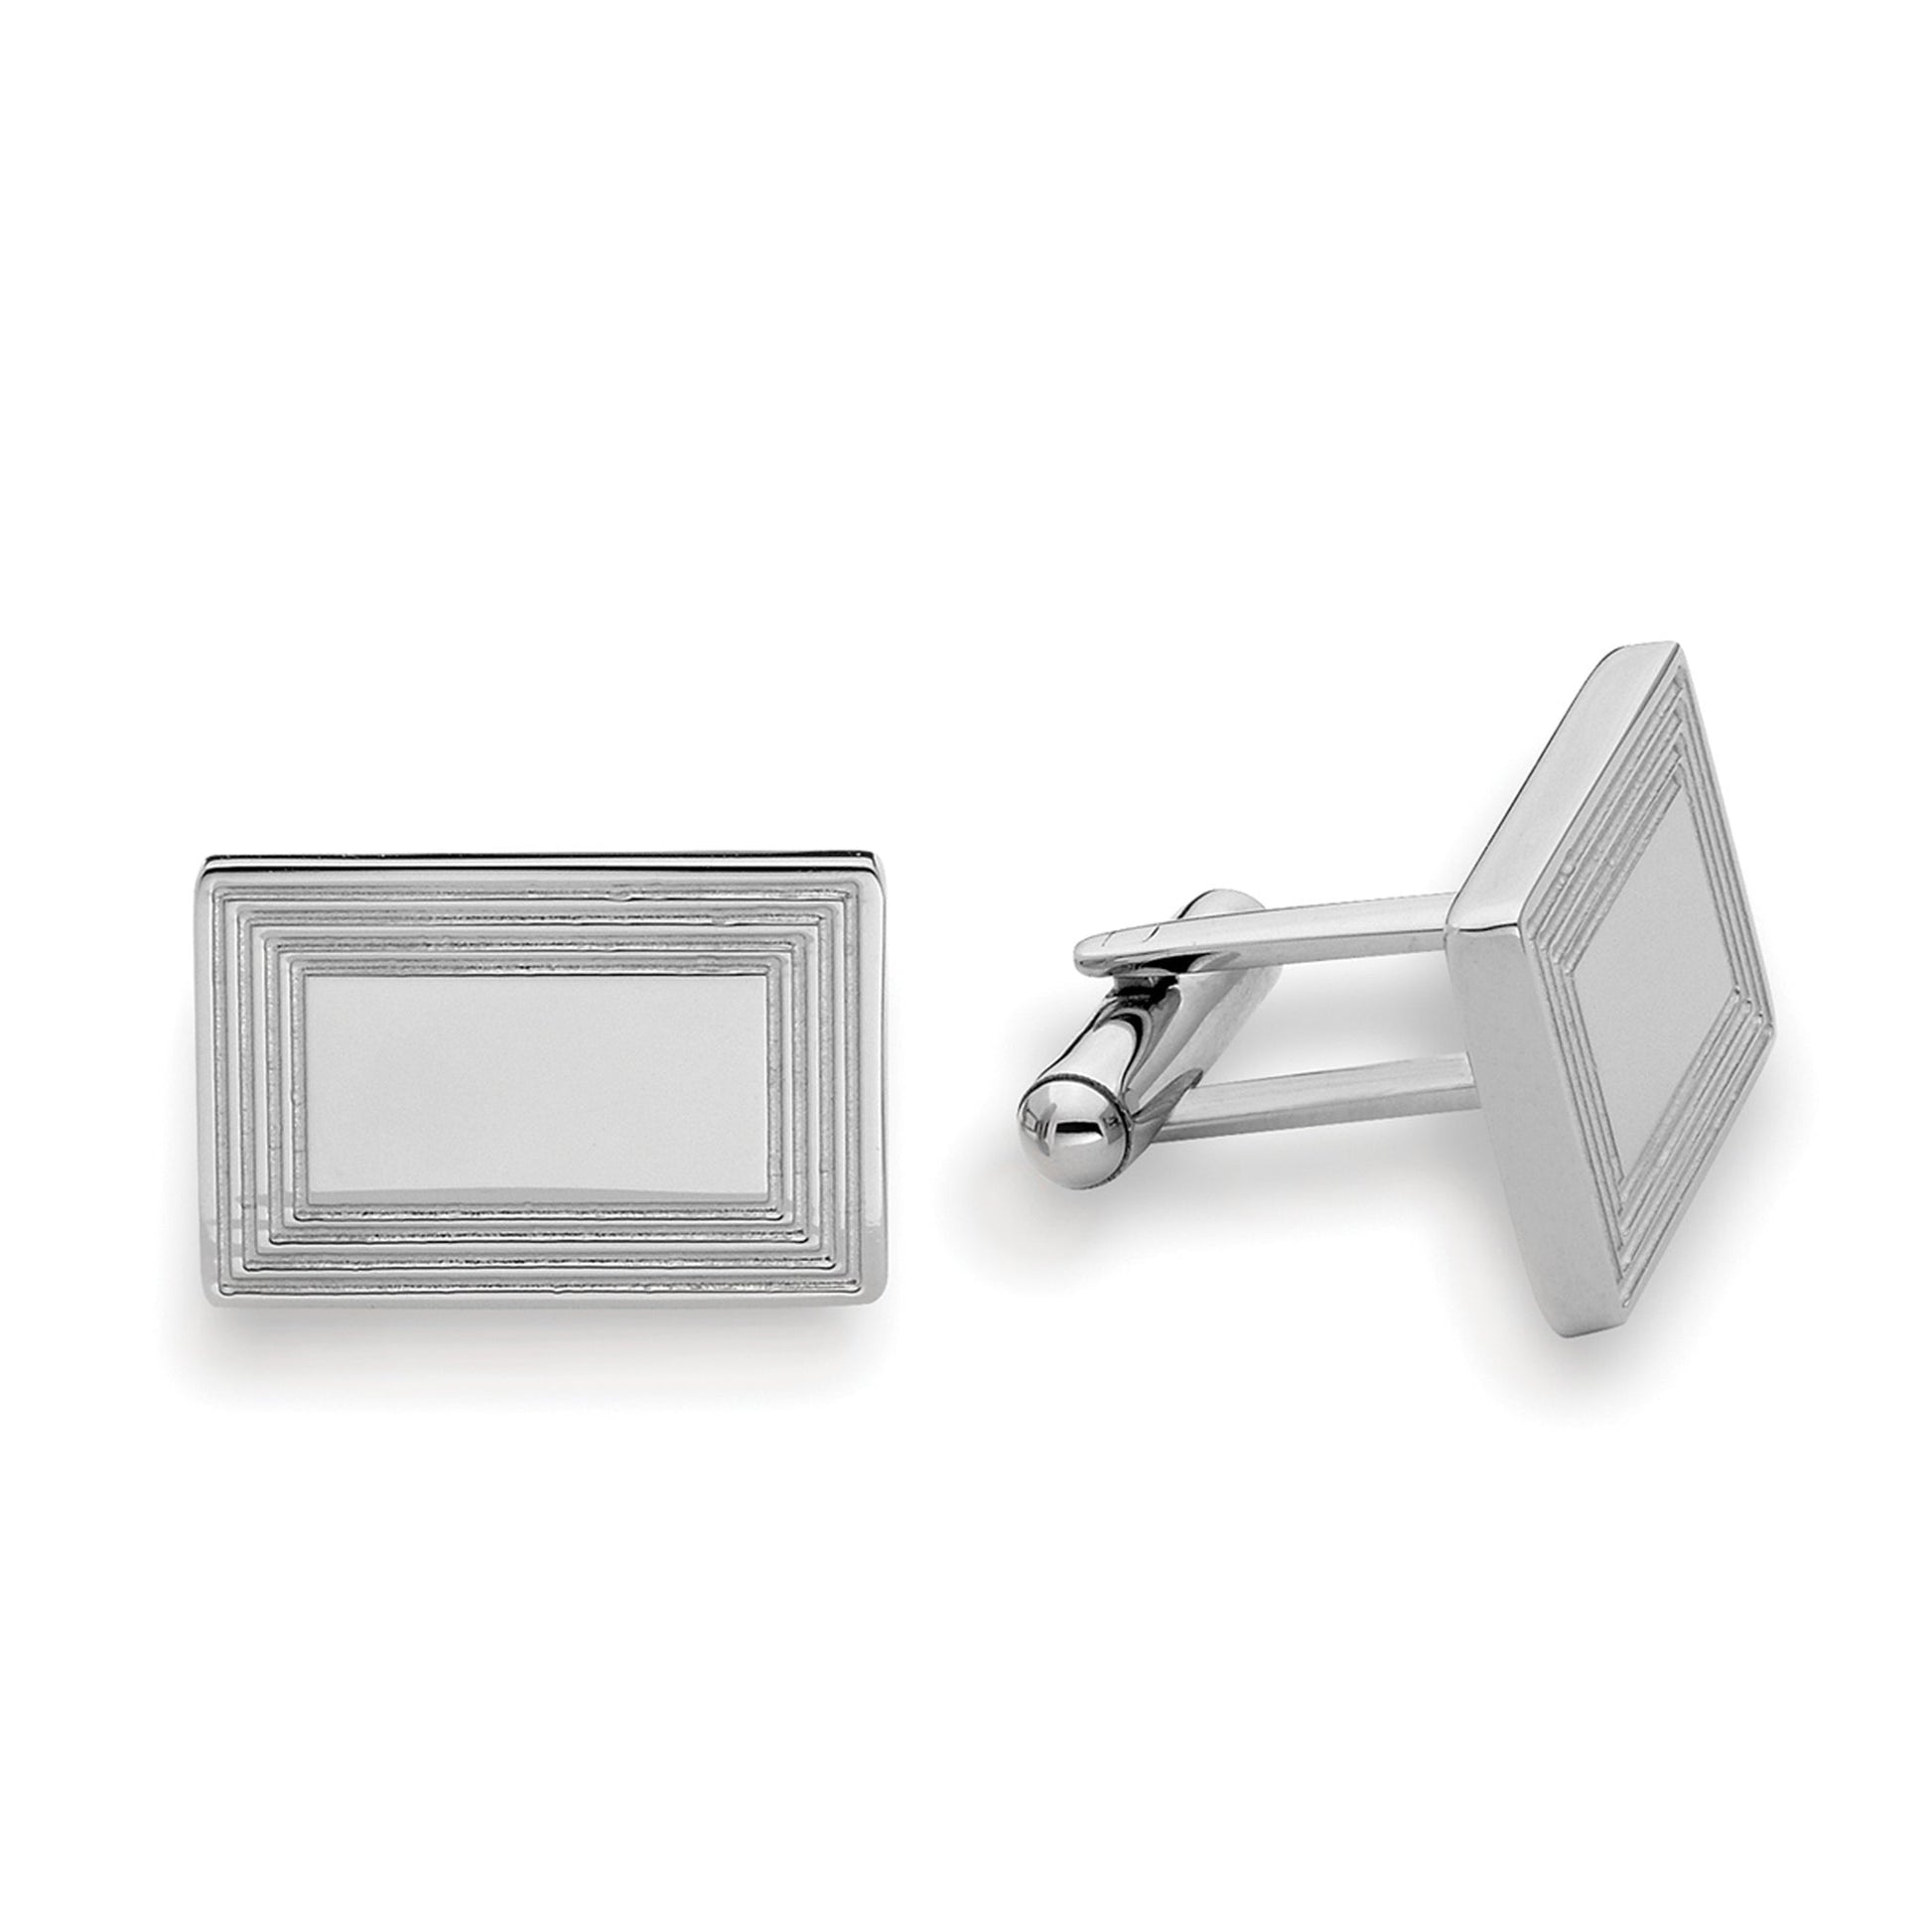 A stainless steel rectangle cufflinks with 3-line frame displayed on a neutral white background.